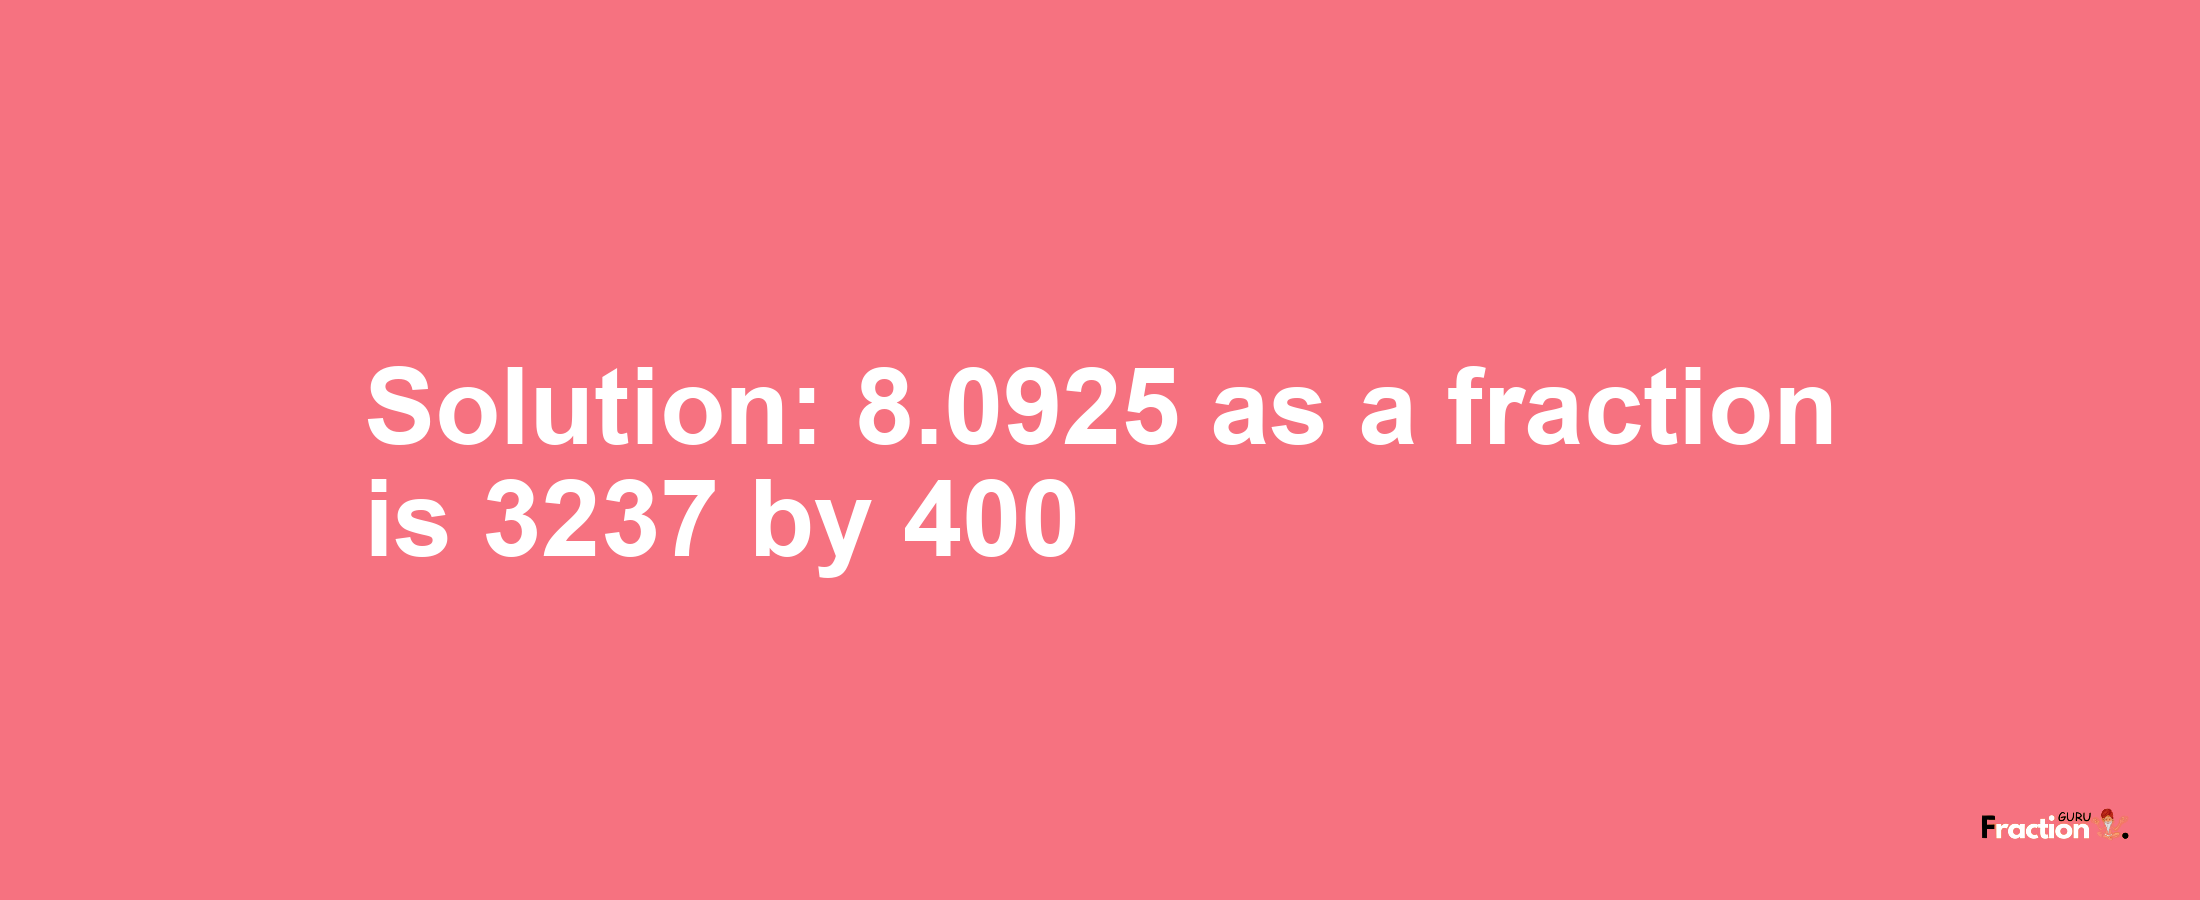 Solution:8.0925 as a fraction is 3237/400